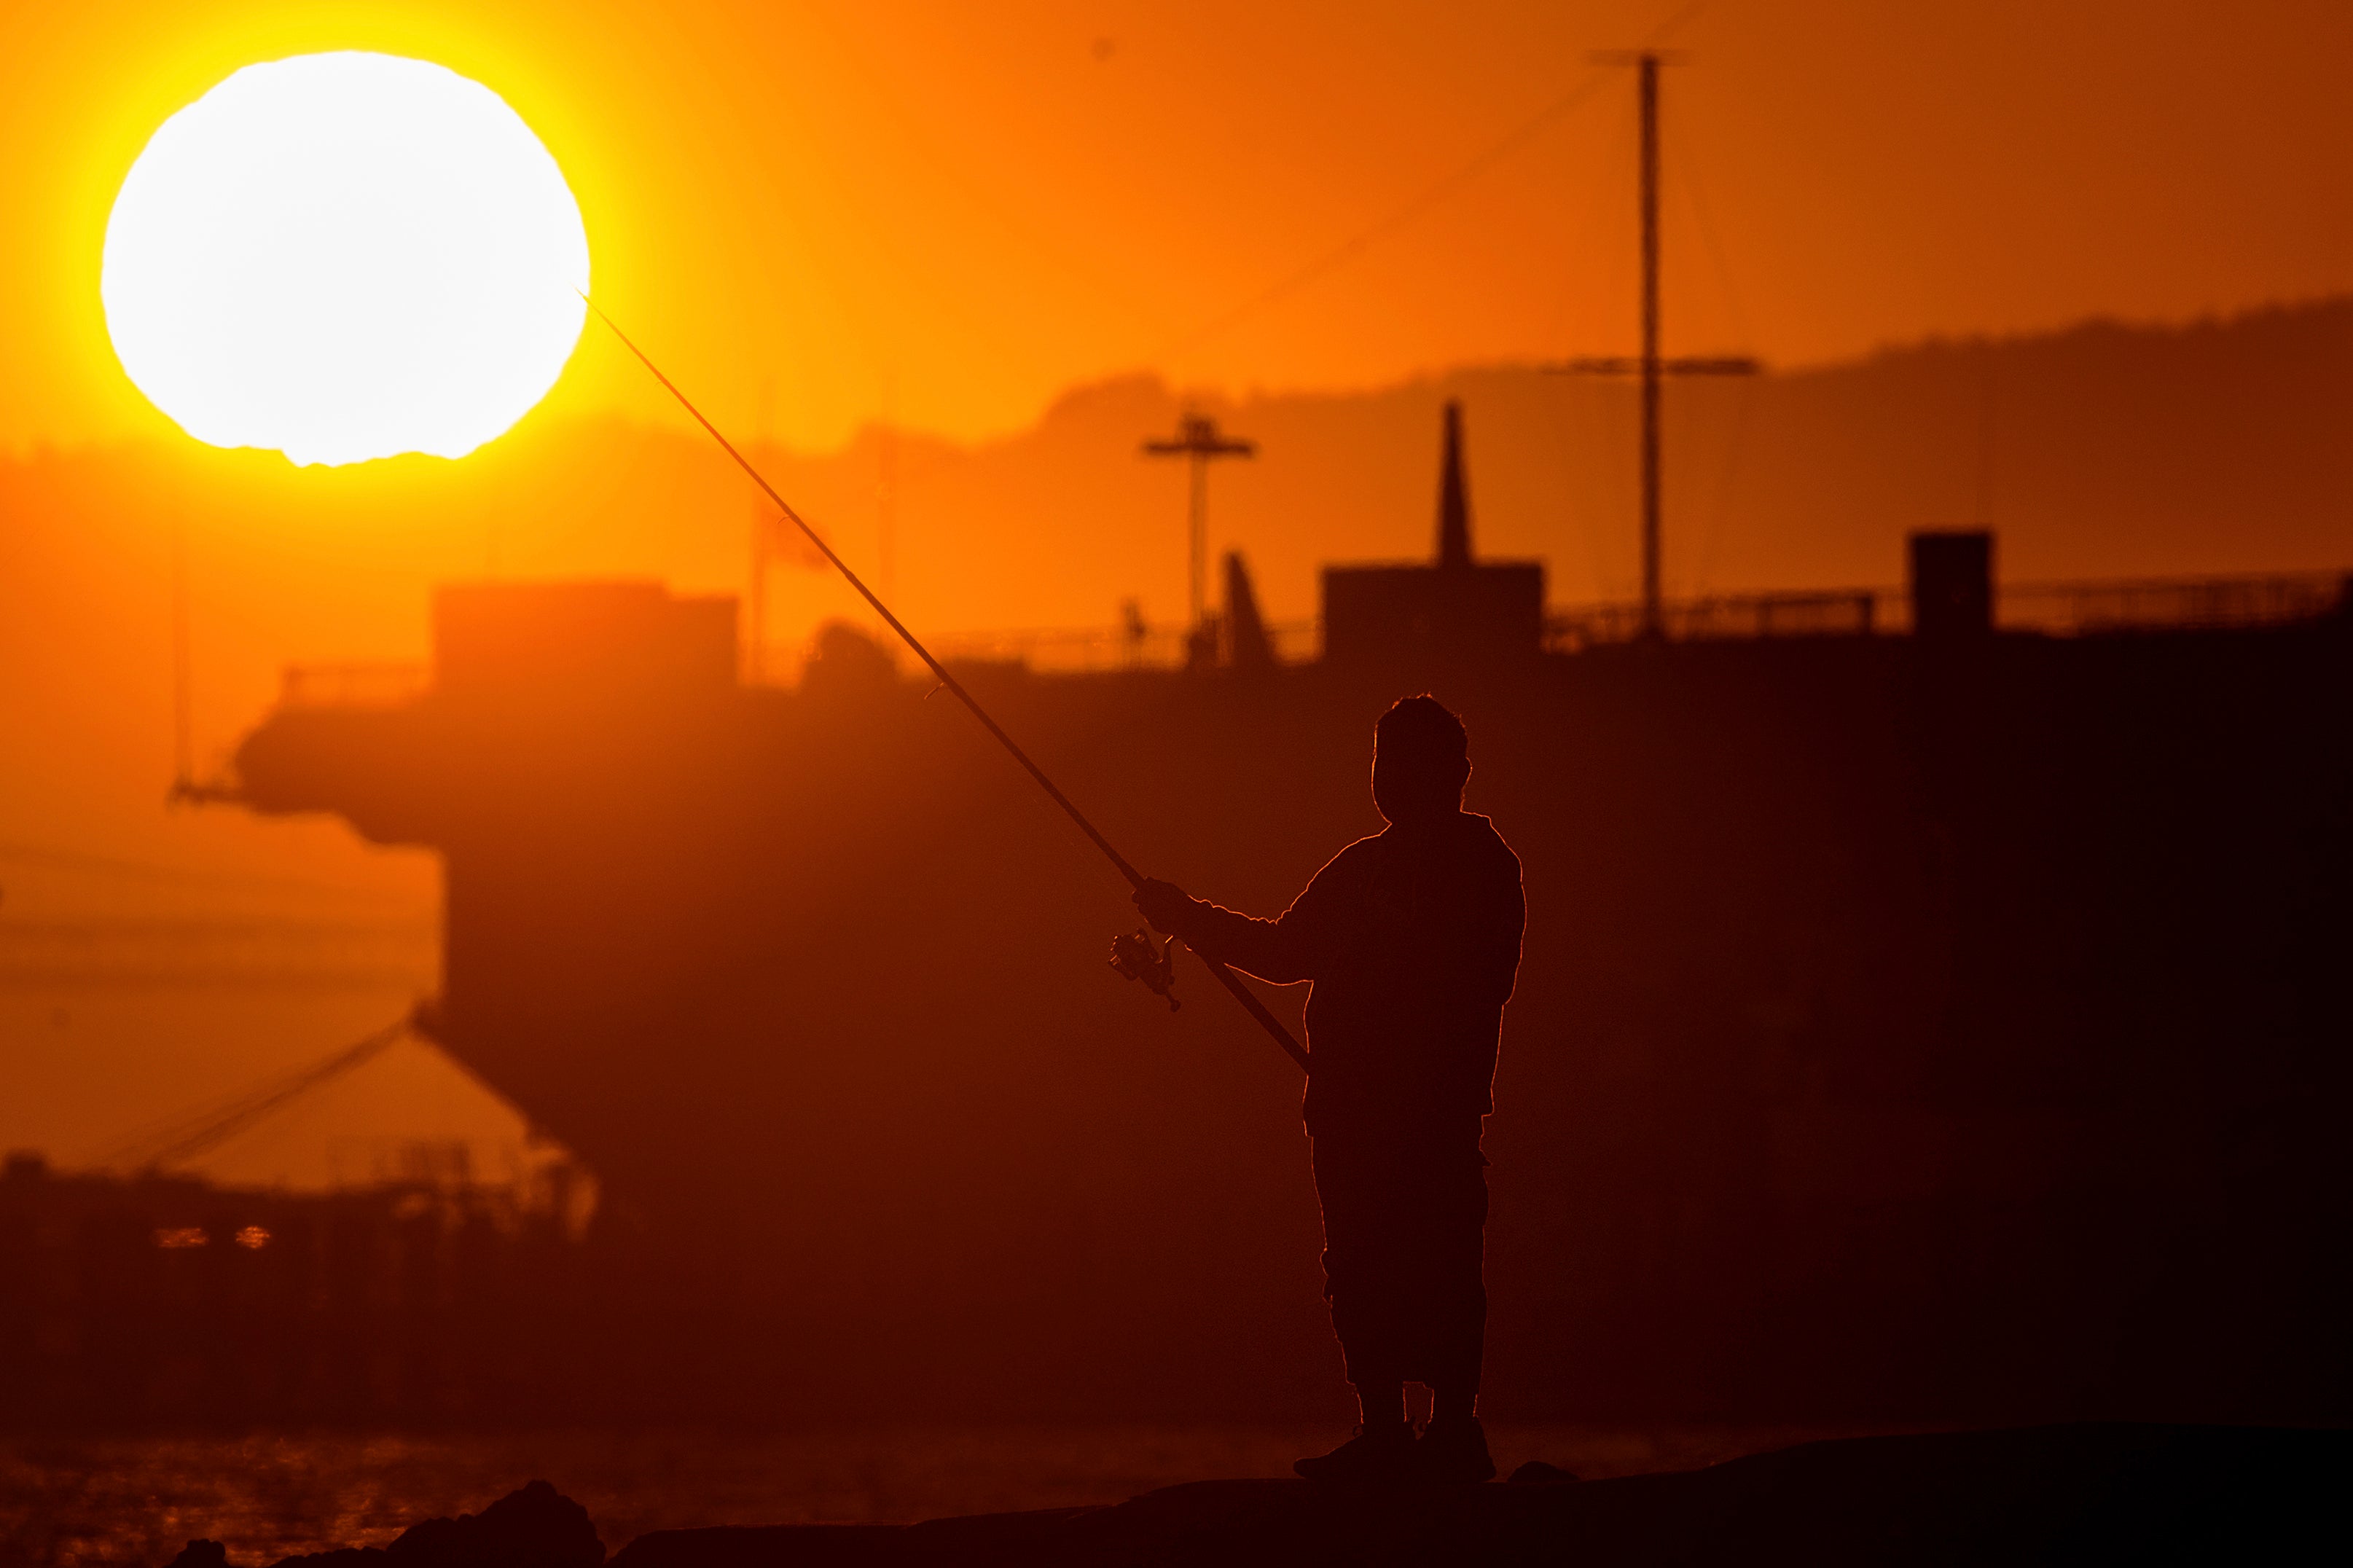 A man fishes off a jetty in Alameda, California, as the sun sets over the San Francisco Bay on July 1. An extended heatwave predicted to blanket Northern California has resulted in red flag fire warnings and the possibility of power shutoffs beginning Tuesday